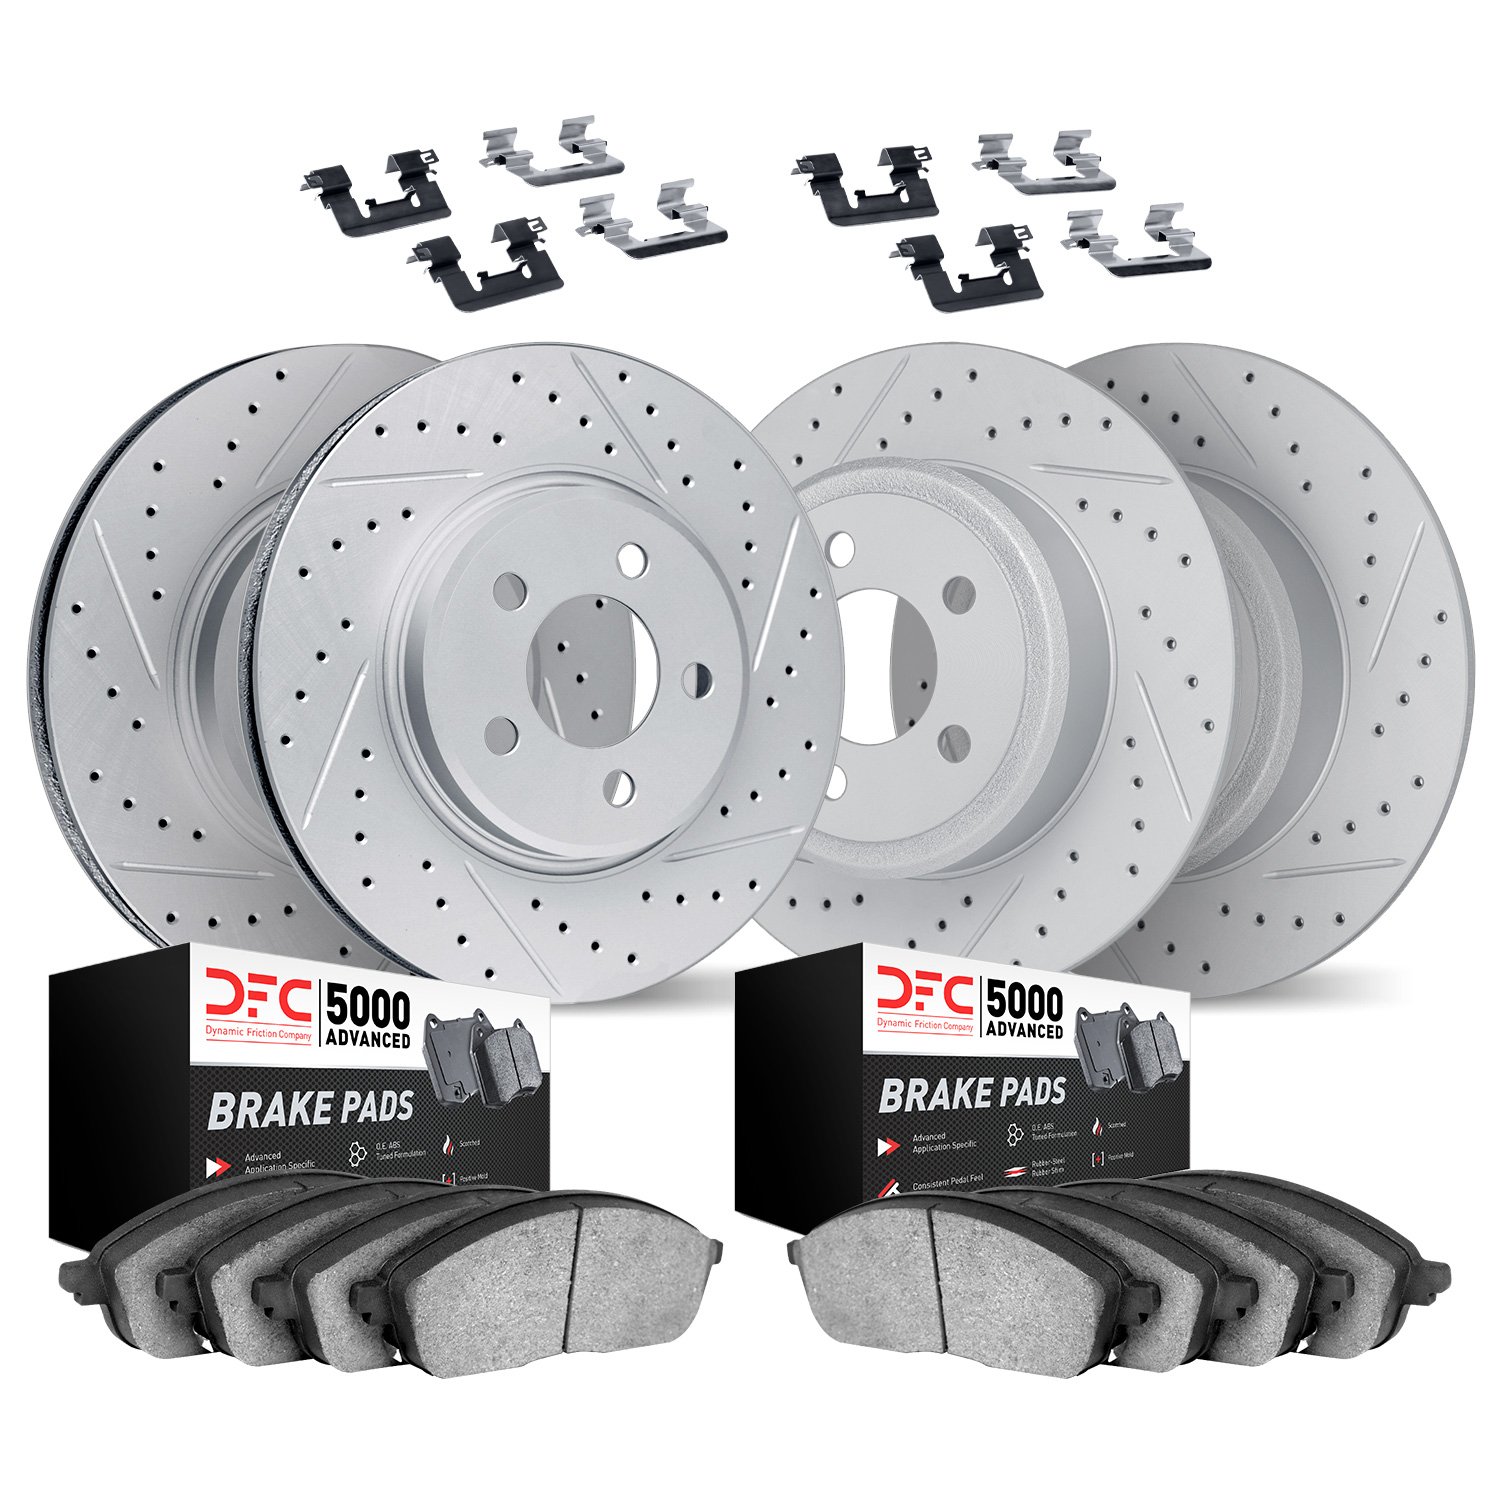 2514-39010 Geoperformance Drilled/Slotted Rotors w/5000 Advanced Brake Pads Kit & Hardware, Fits Select Mopar, Position: Front a